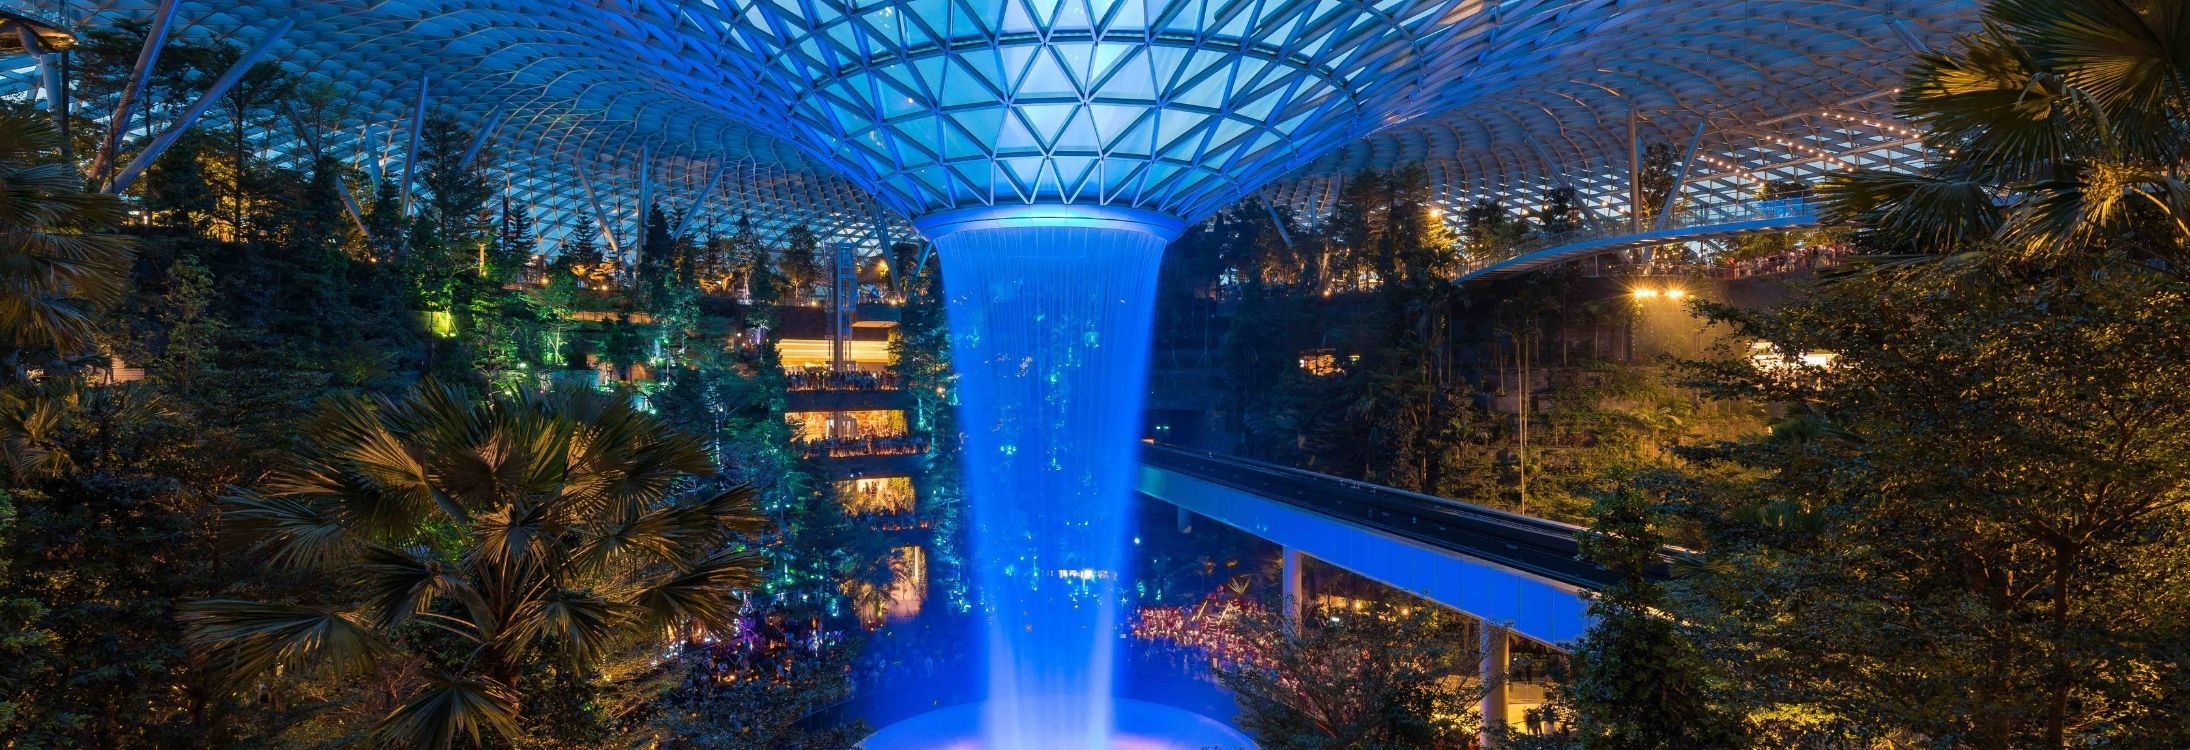 Singapore's latest attraction, The Jewel